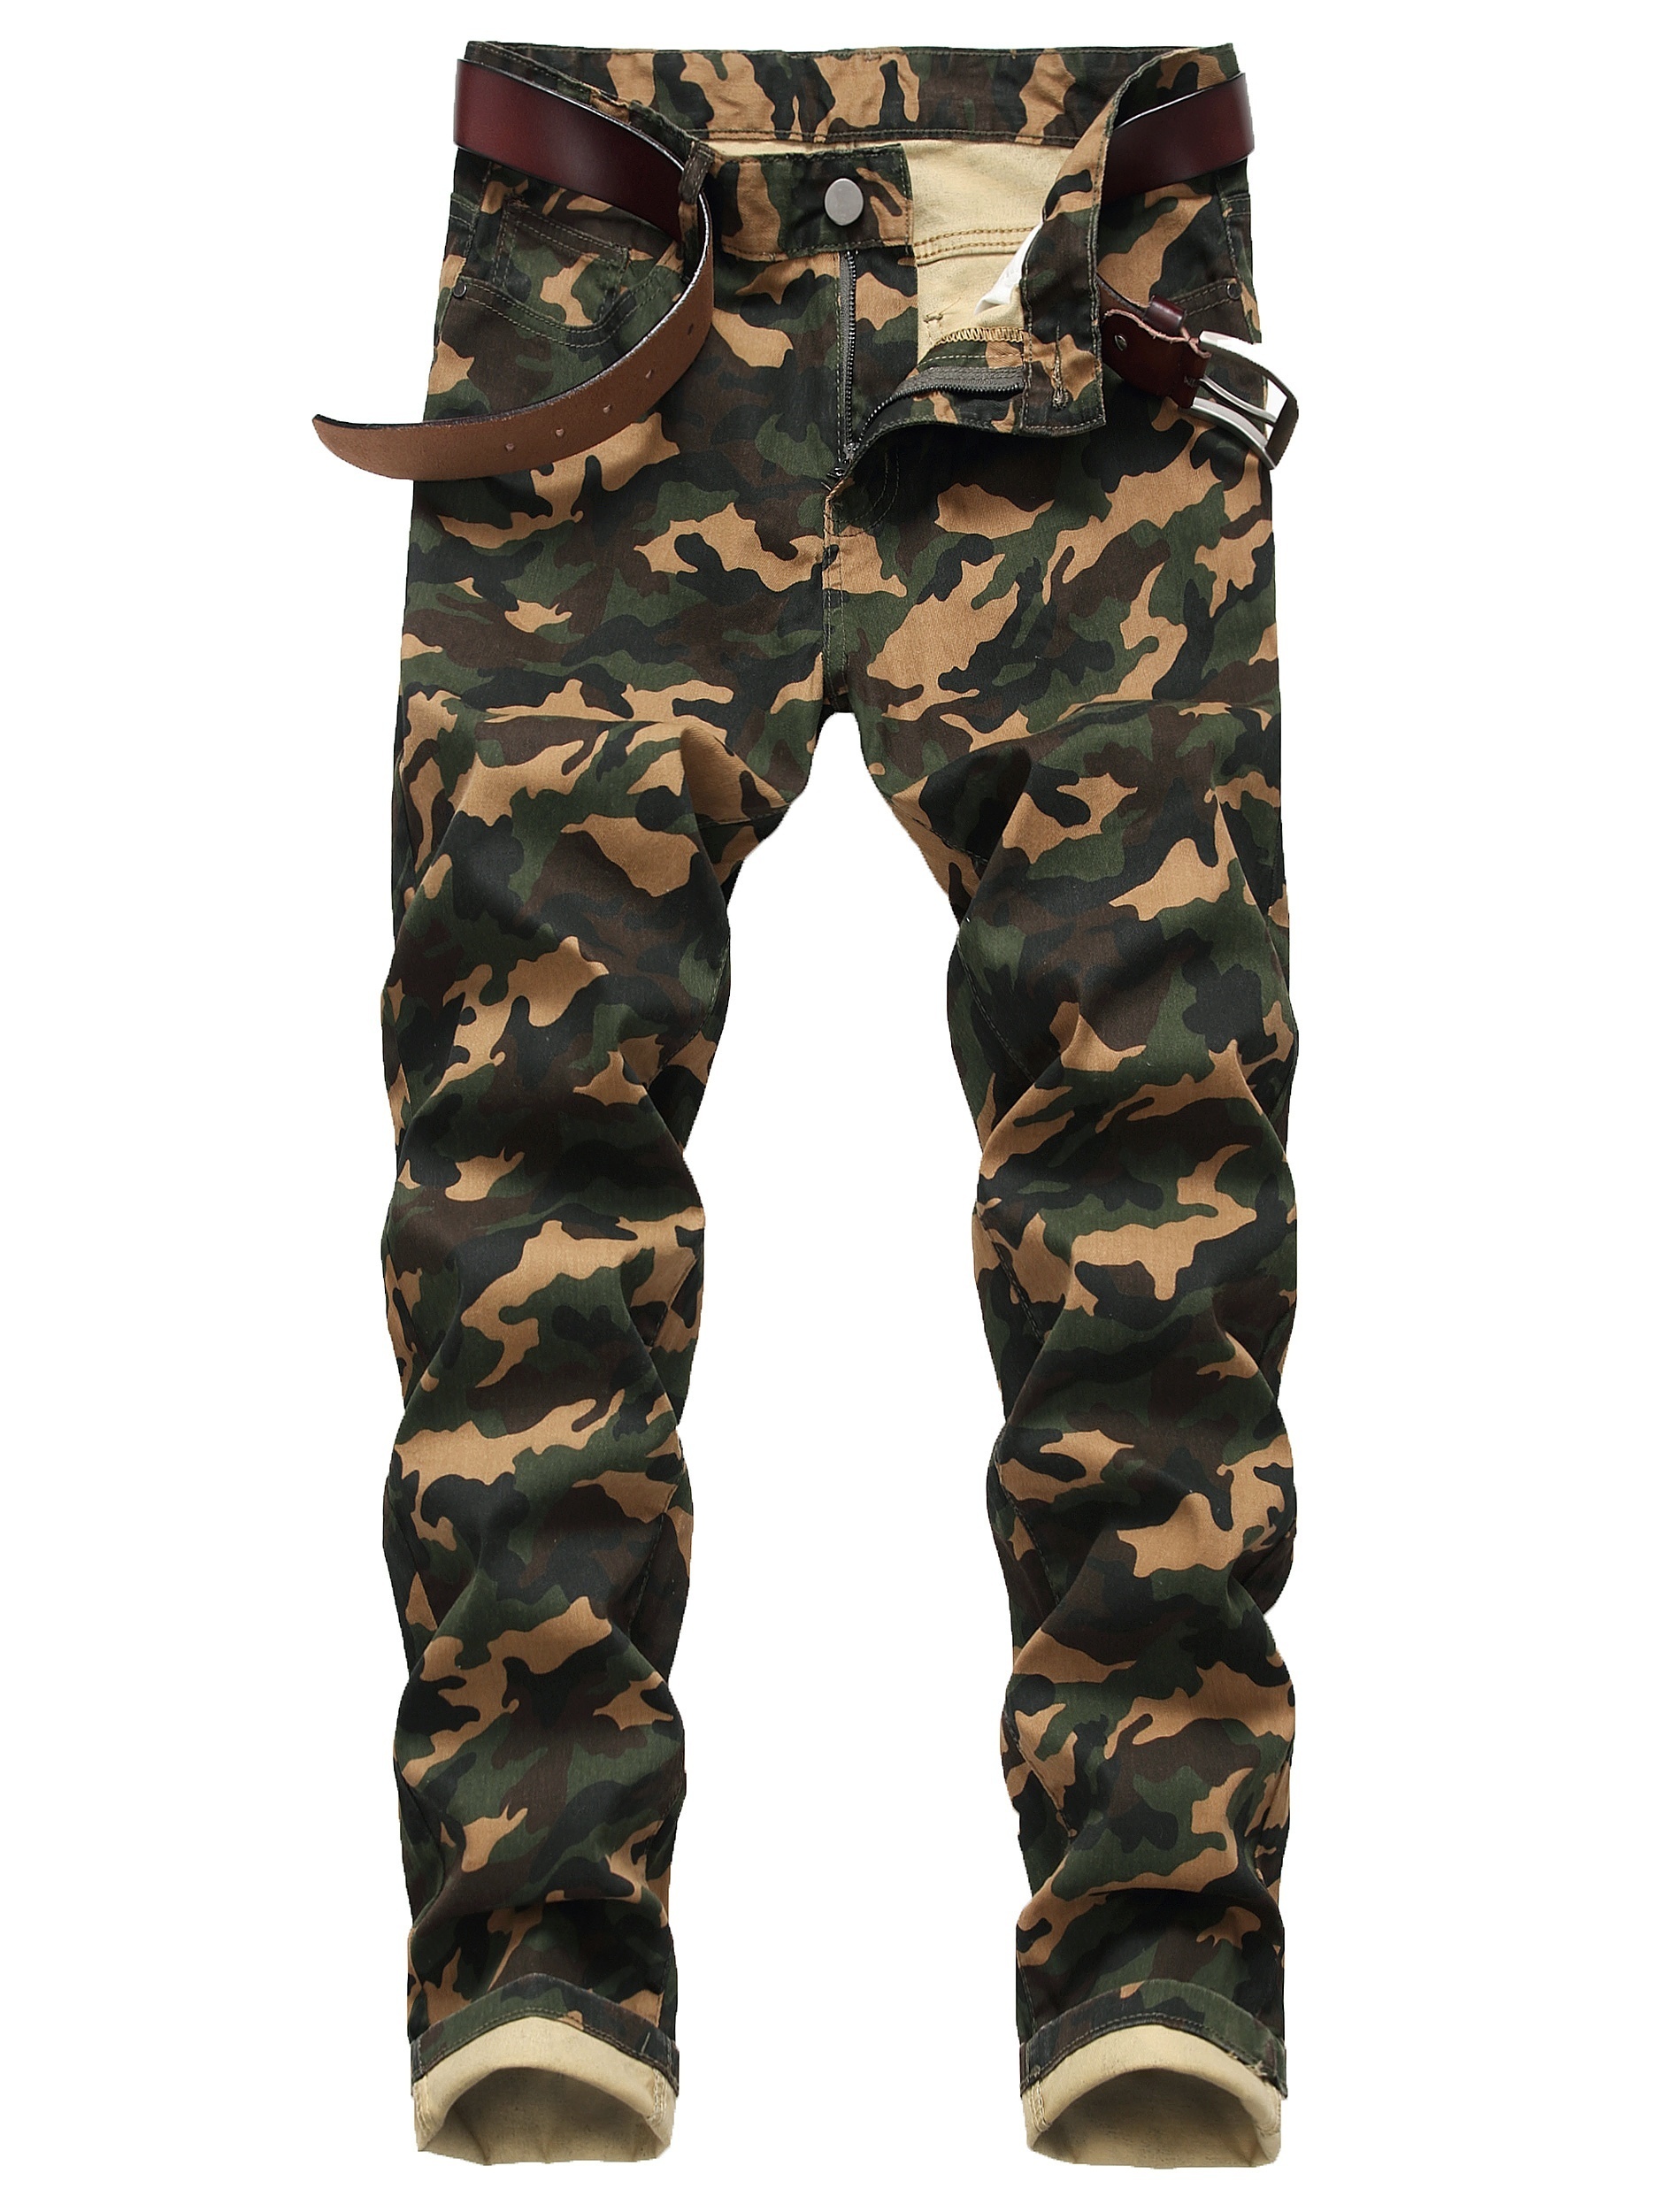 New Men Fashion Camo Overall Skinny Pants Military Outdoor Hip-hop Punk  Trousers | eBay